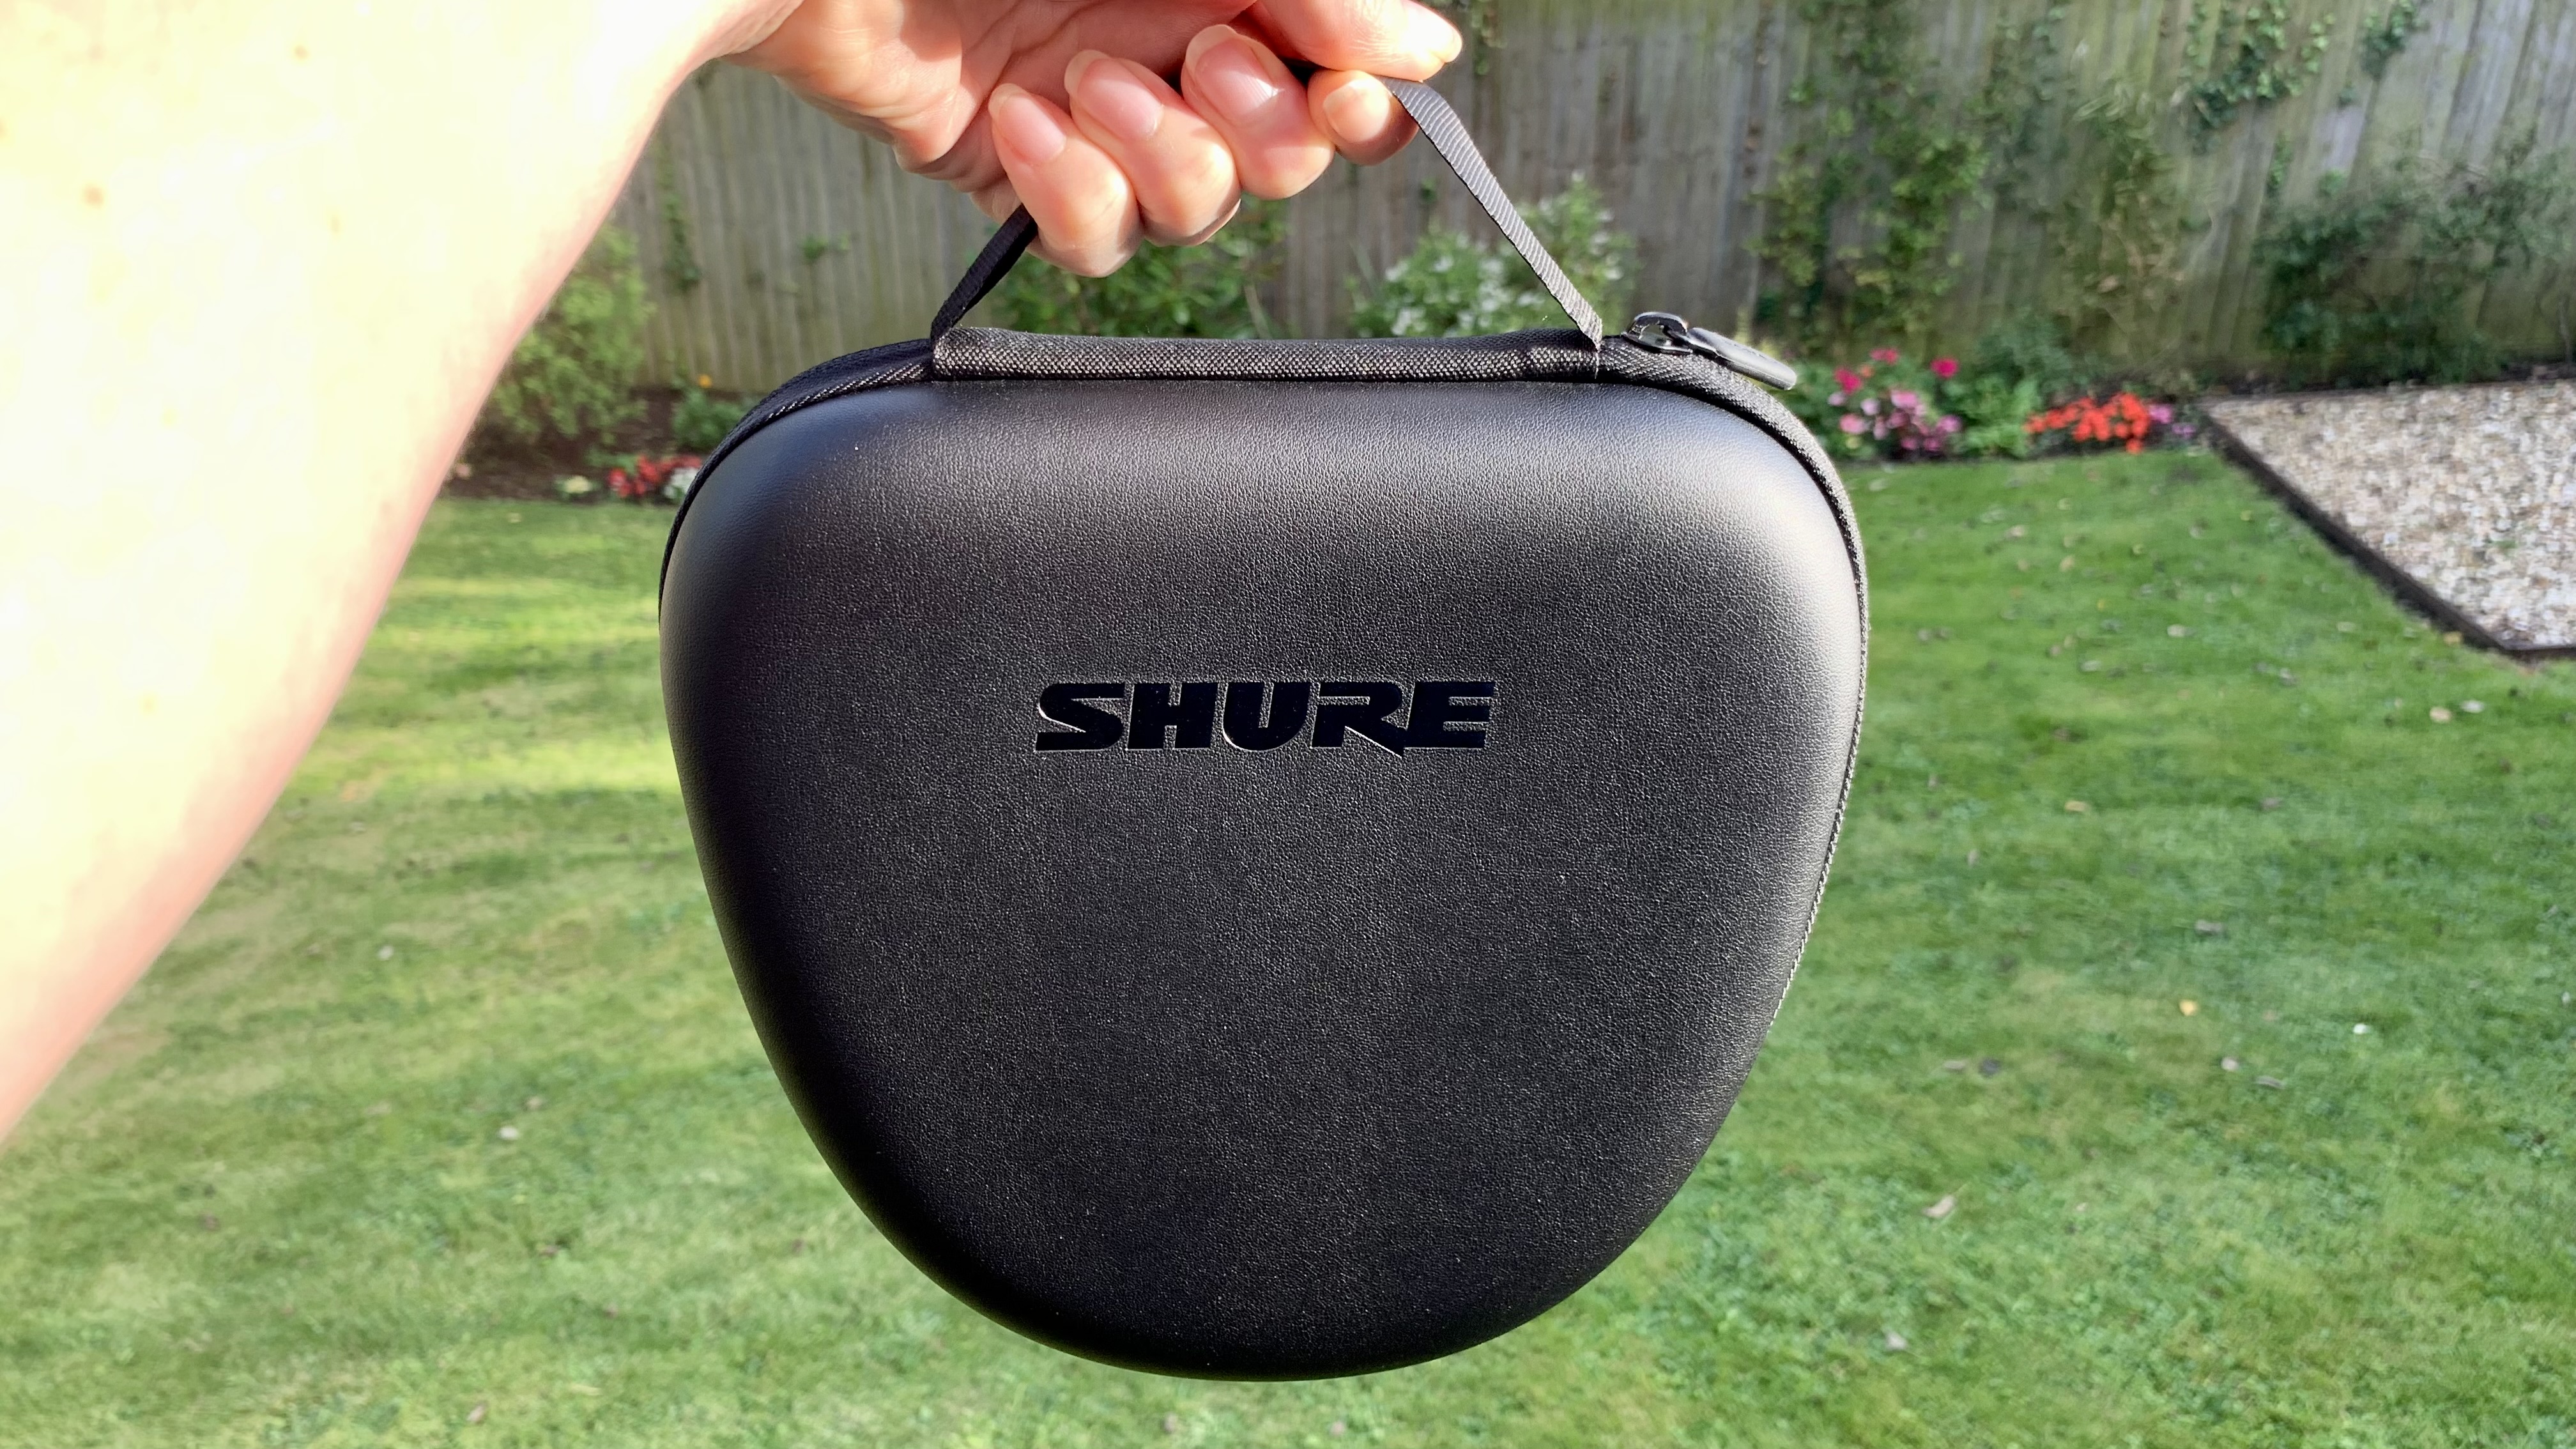 Shure Aonic 50 Gen 2 case, held in hand with a garden in the background